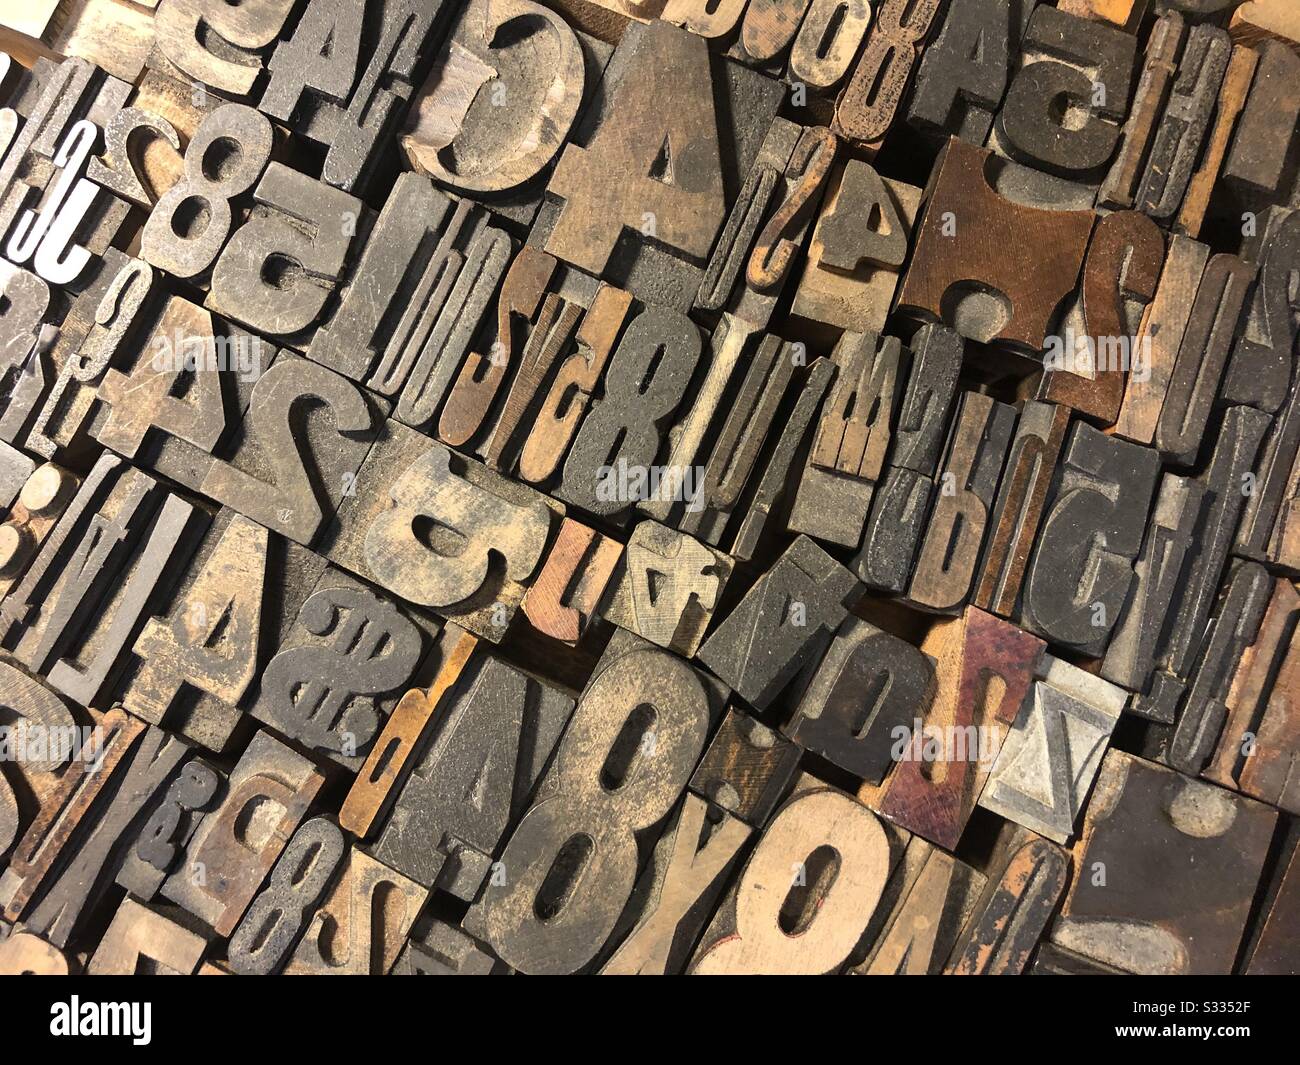 Assortment of antique typeset letters and numbers Stock Photo